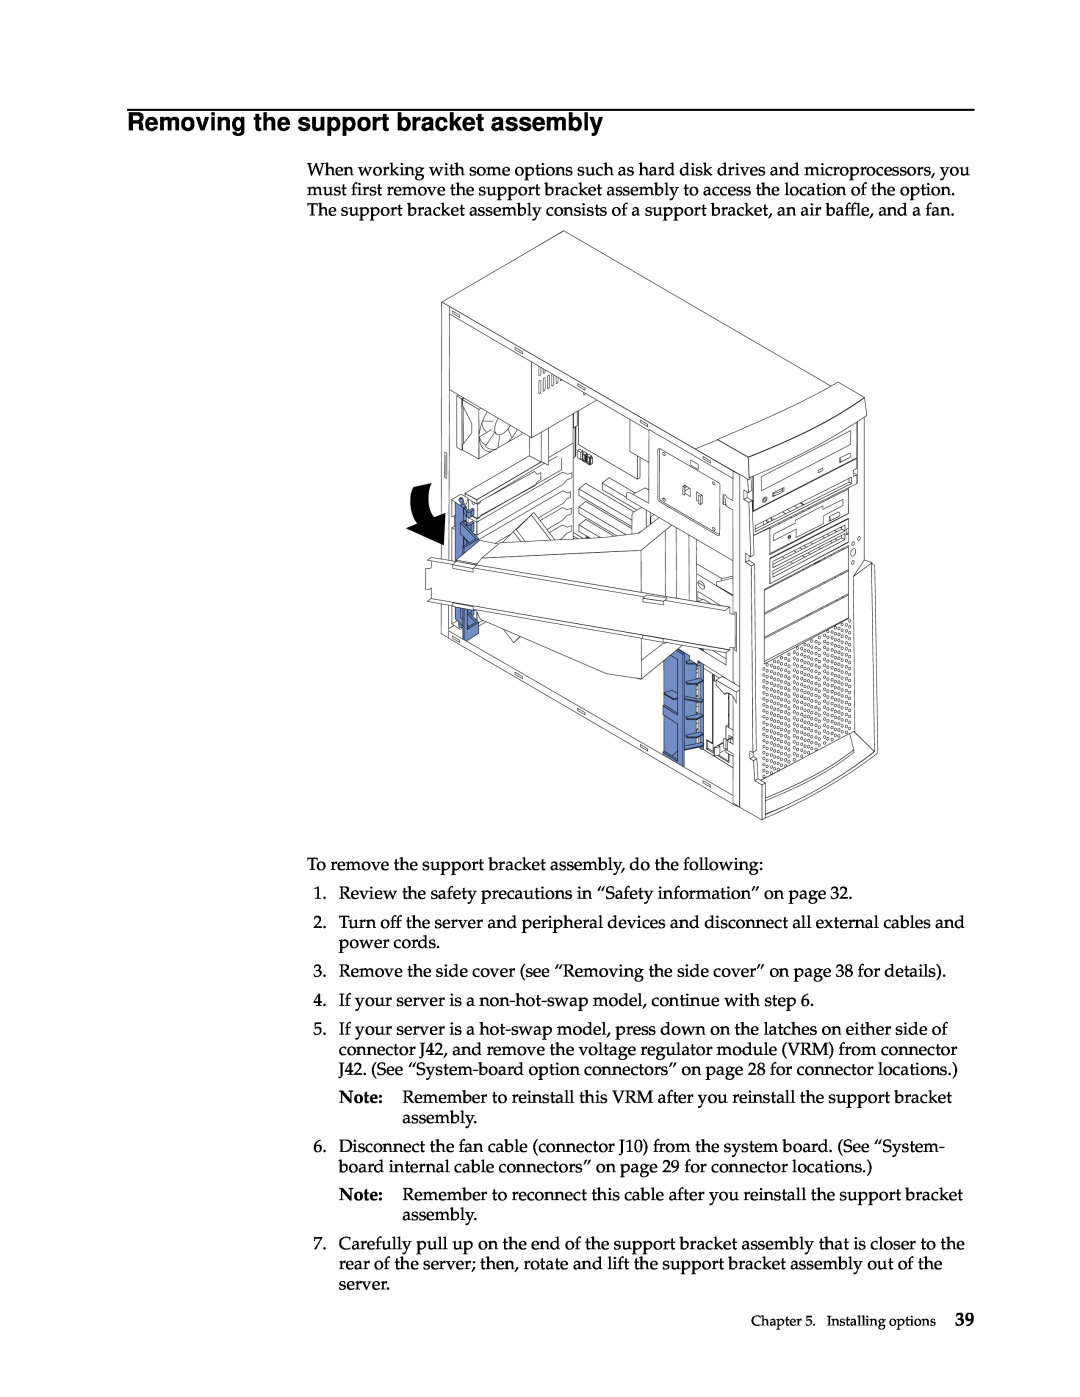 IBM 220 manual Removing the support bracket assembly 